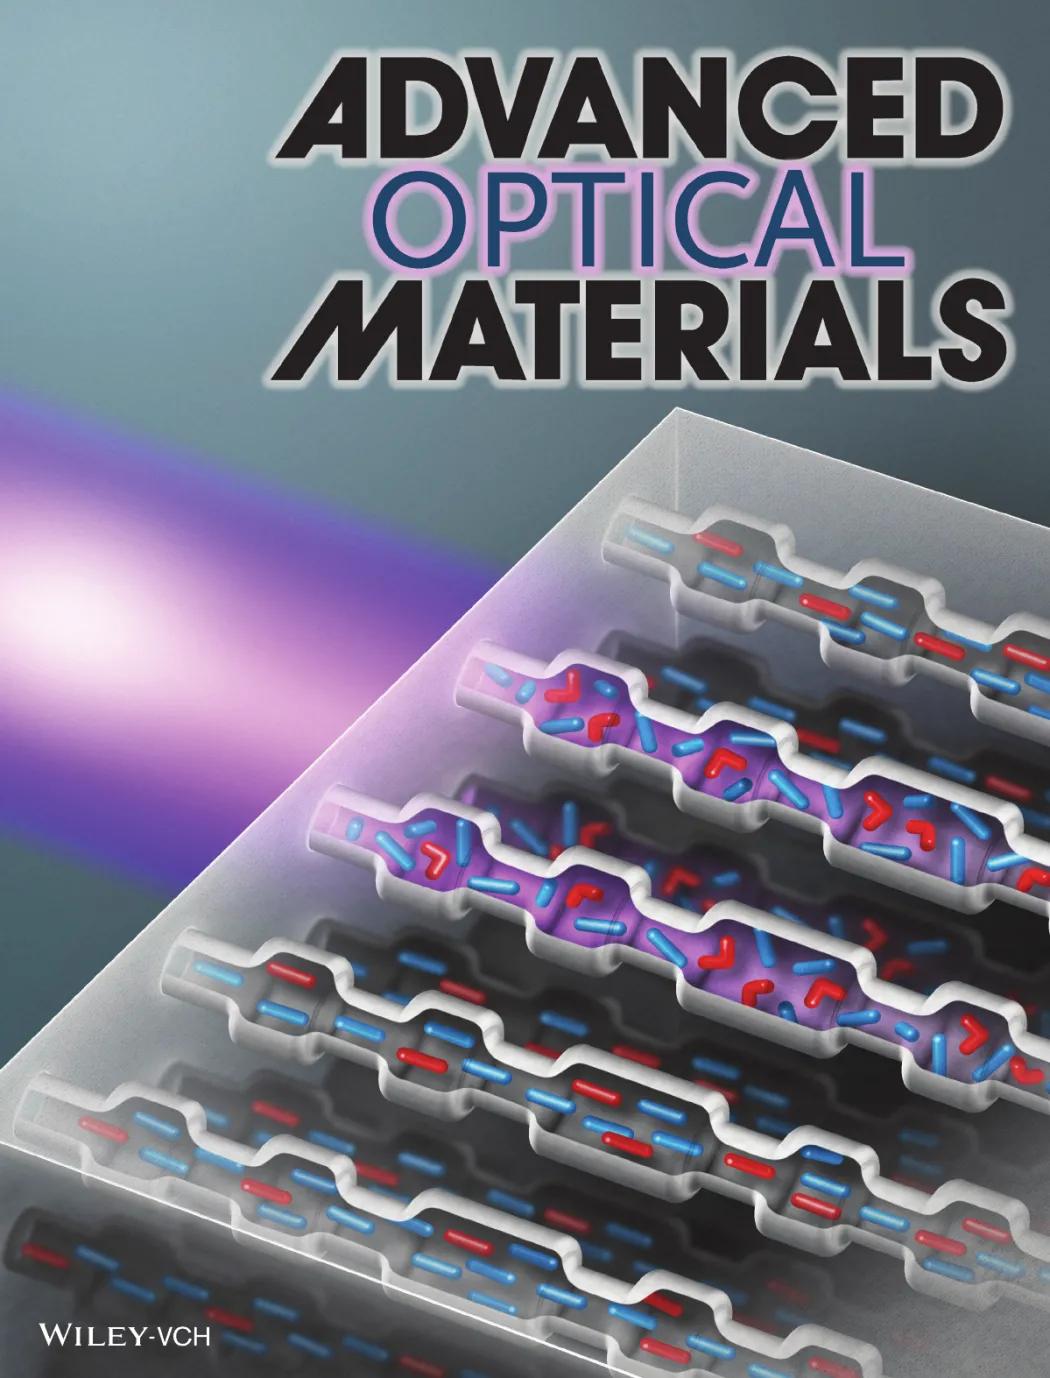 The back cover of the November issue of Advanced Optical Materials